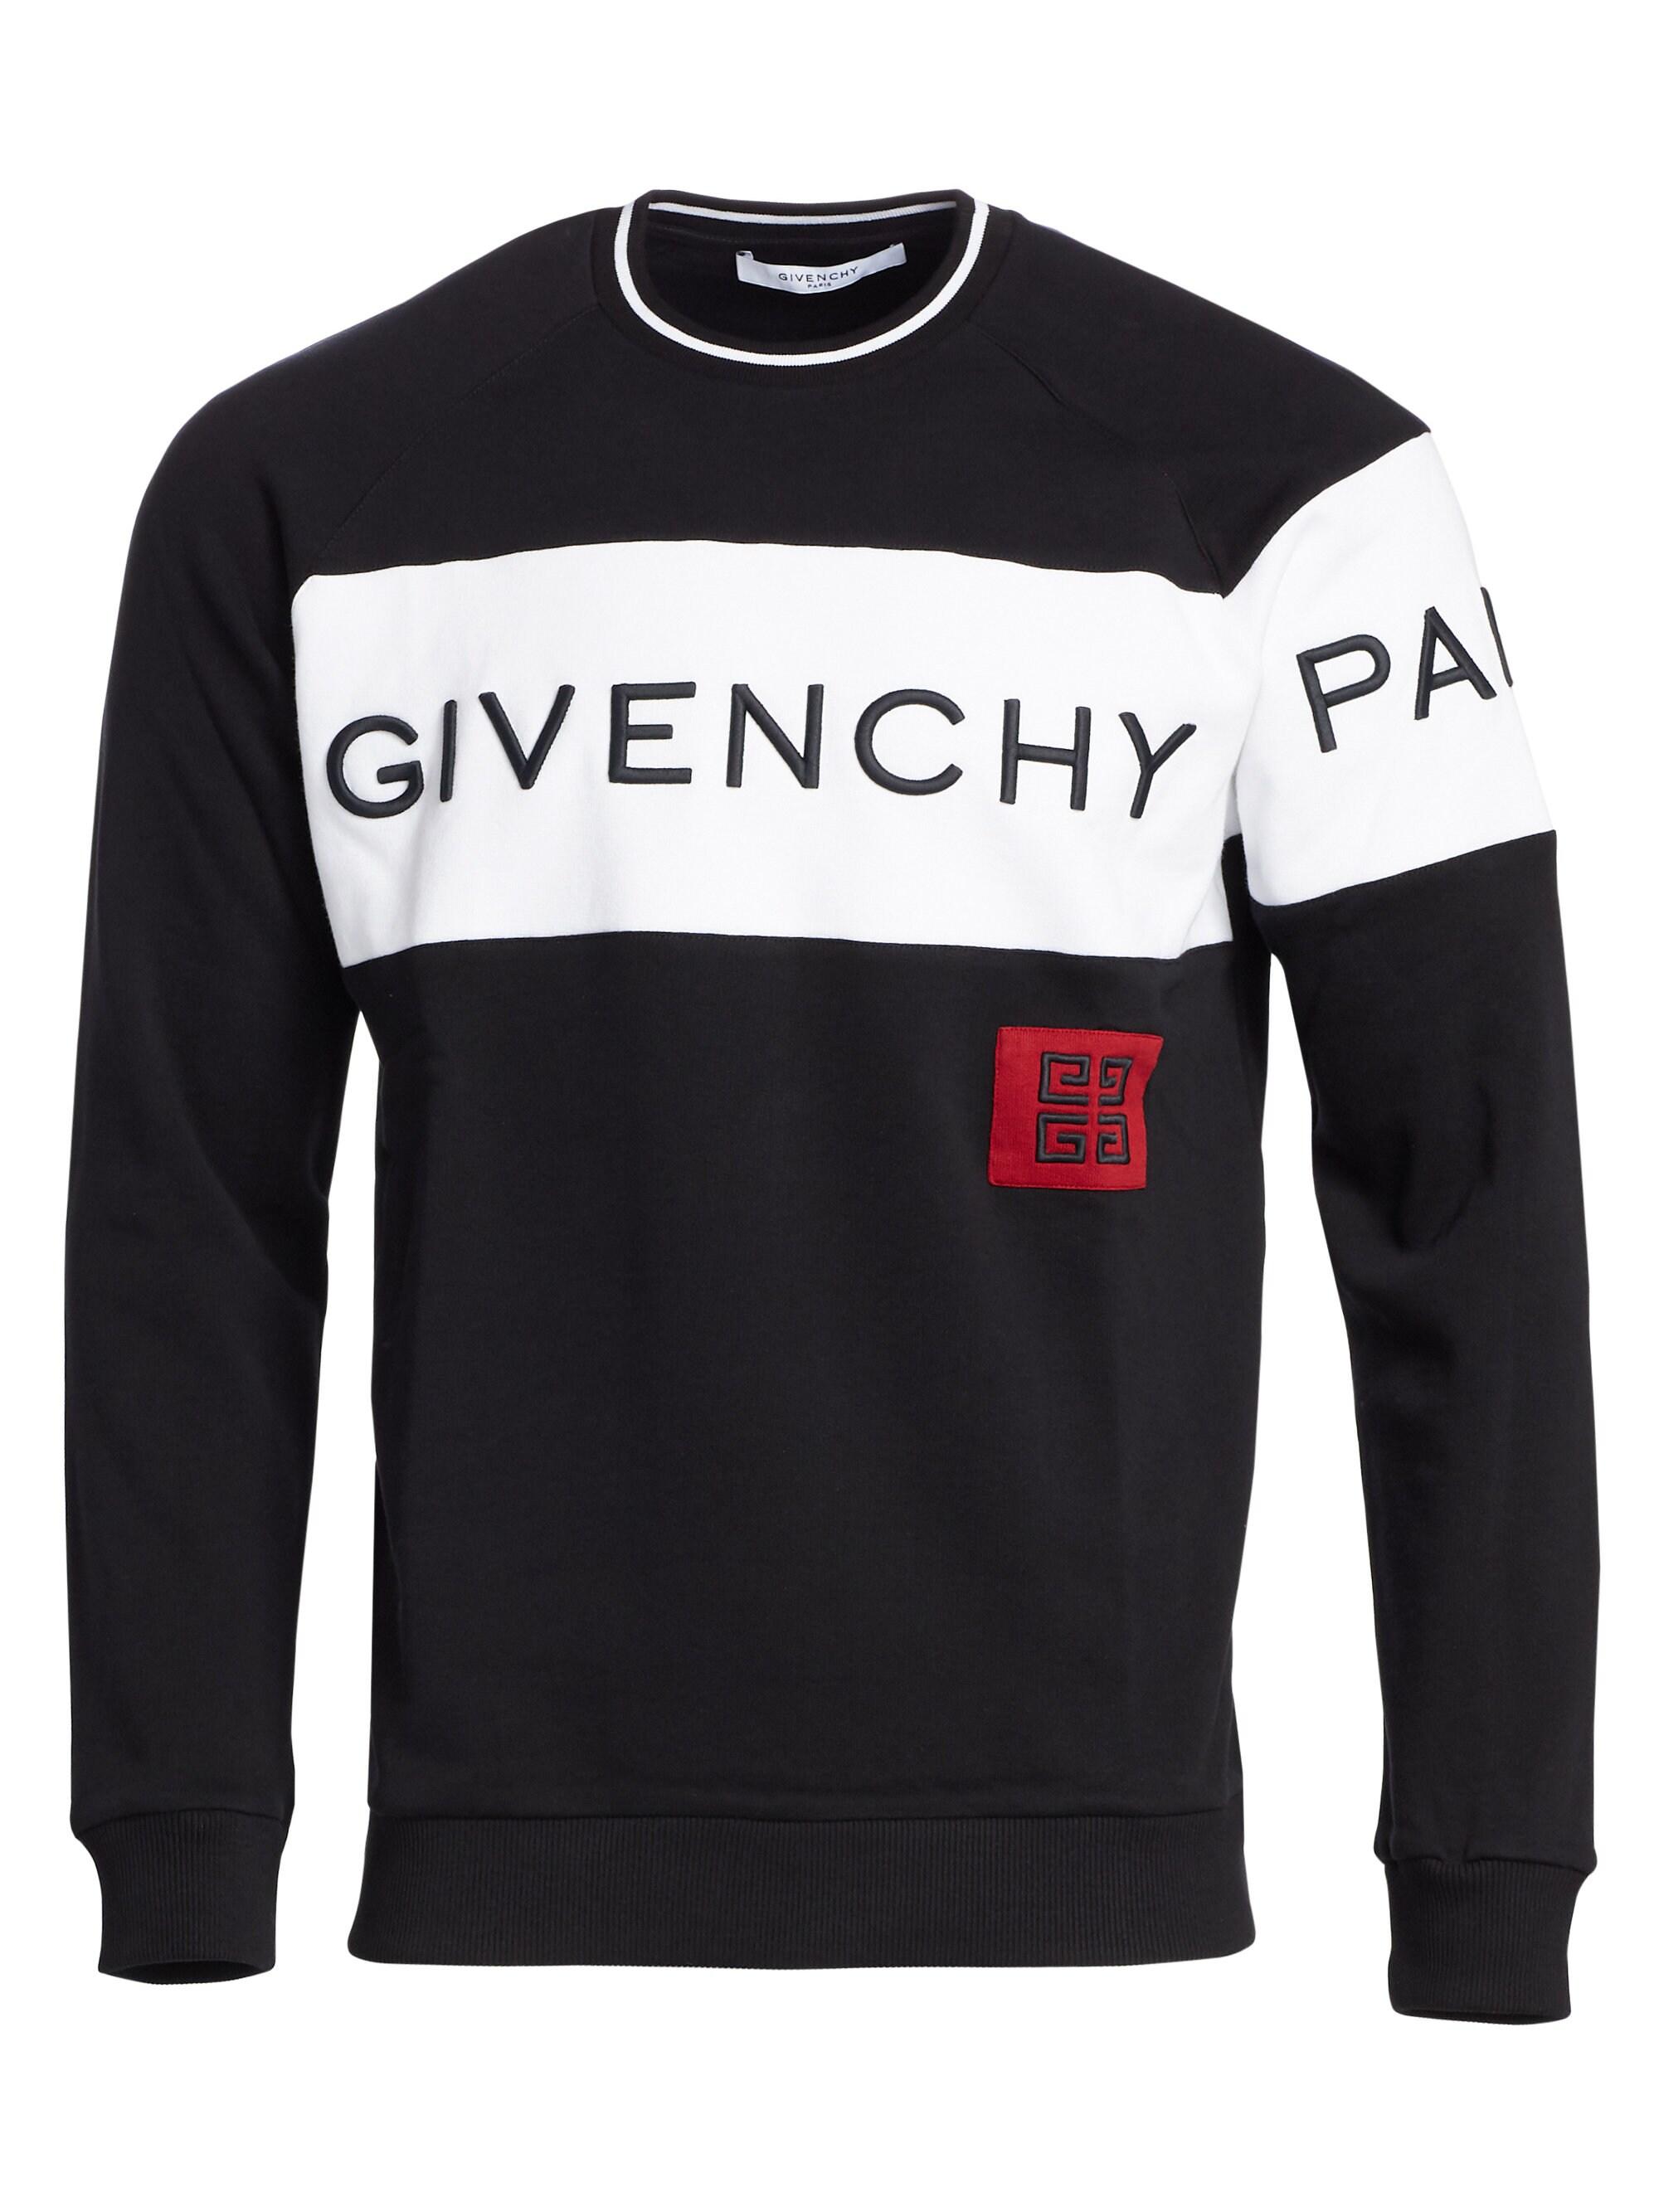 Givenchy Crew Neck Sweater Poland, SAVE 55% 